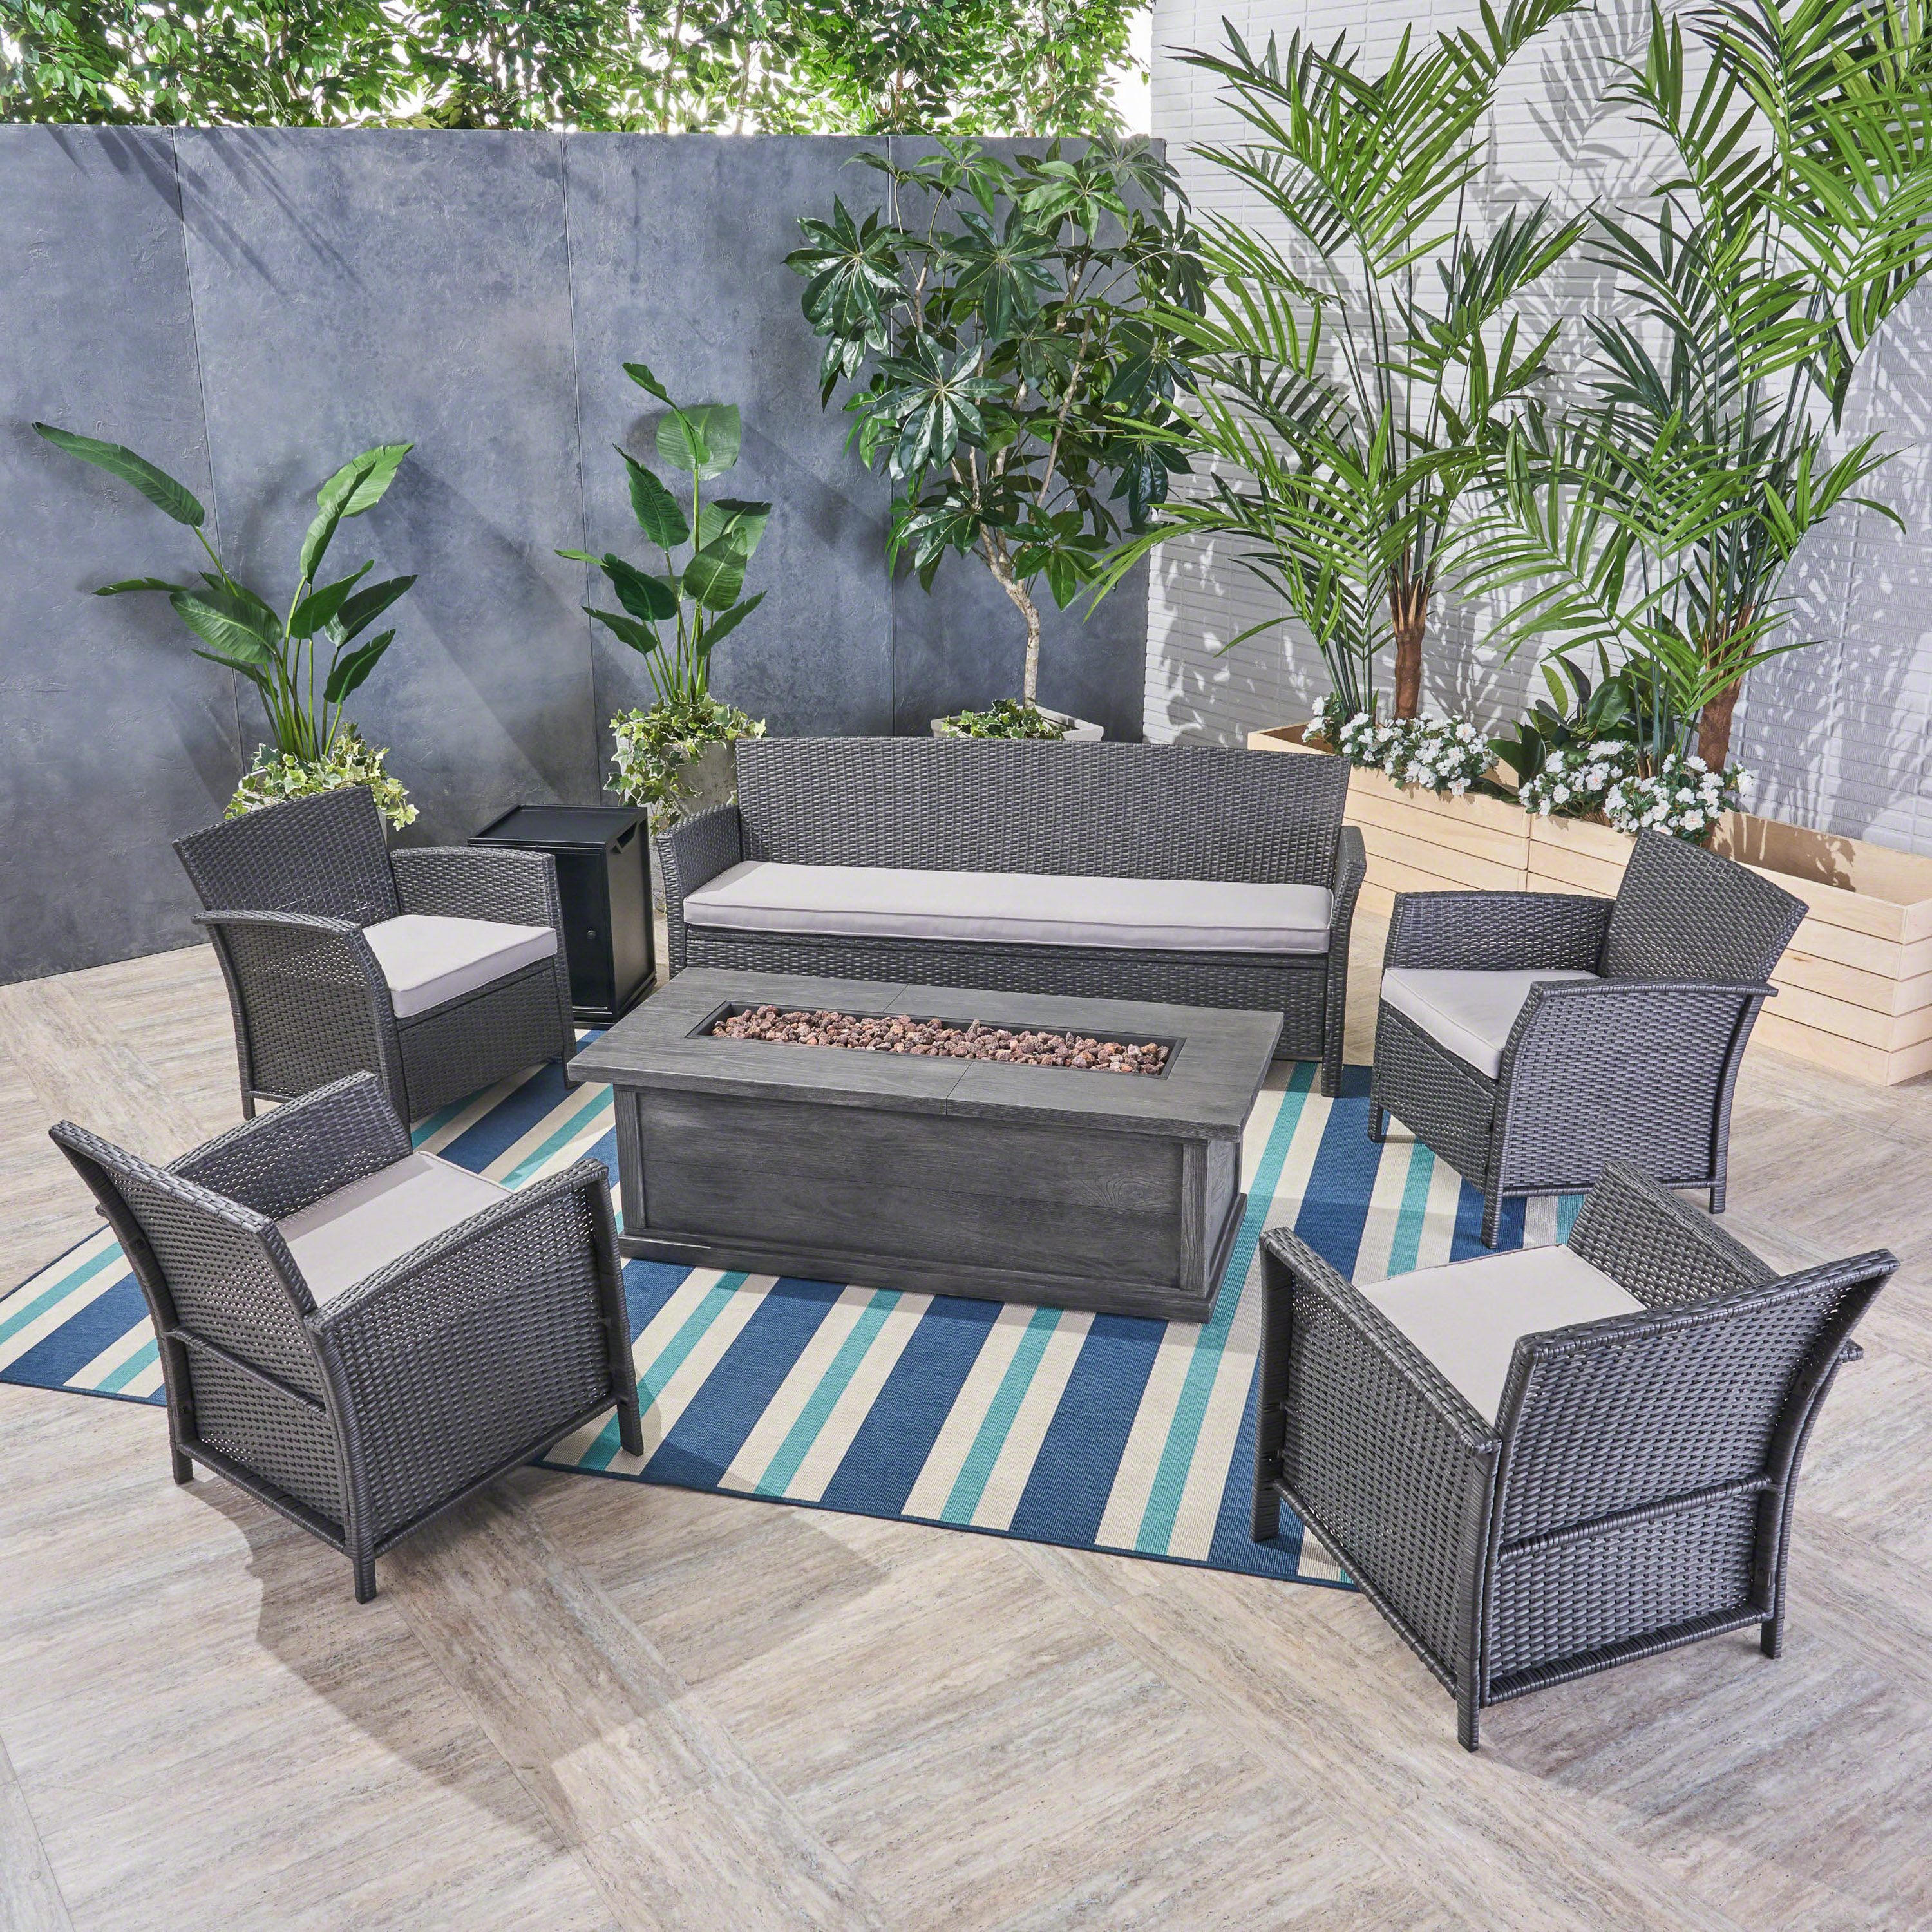 Caradog Wicker 6 - Person Patio Conversation Sets with Cushions Coffee Table and Fire Pit Latitude Run Frame Color/Cushion Color: Brown Frame/Beige C